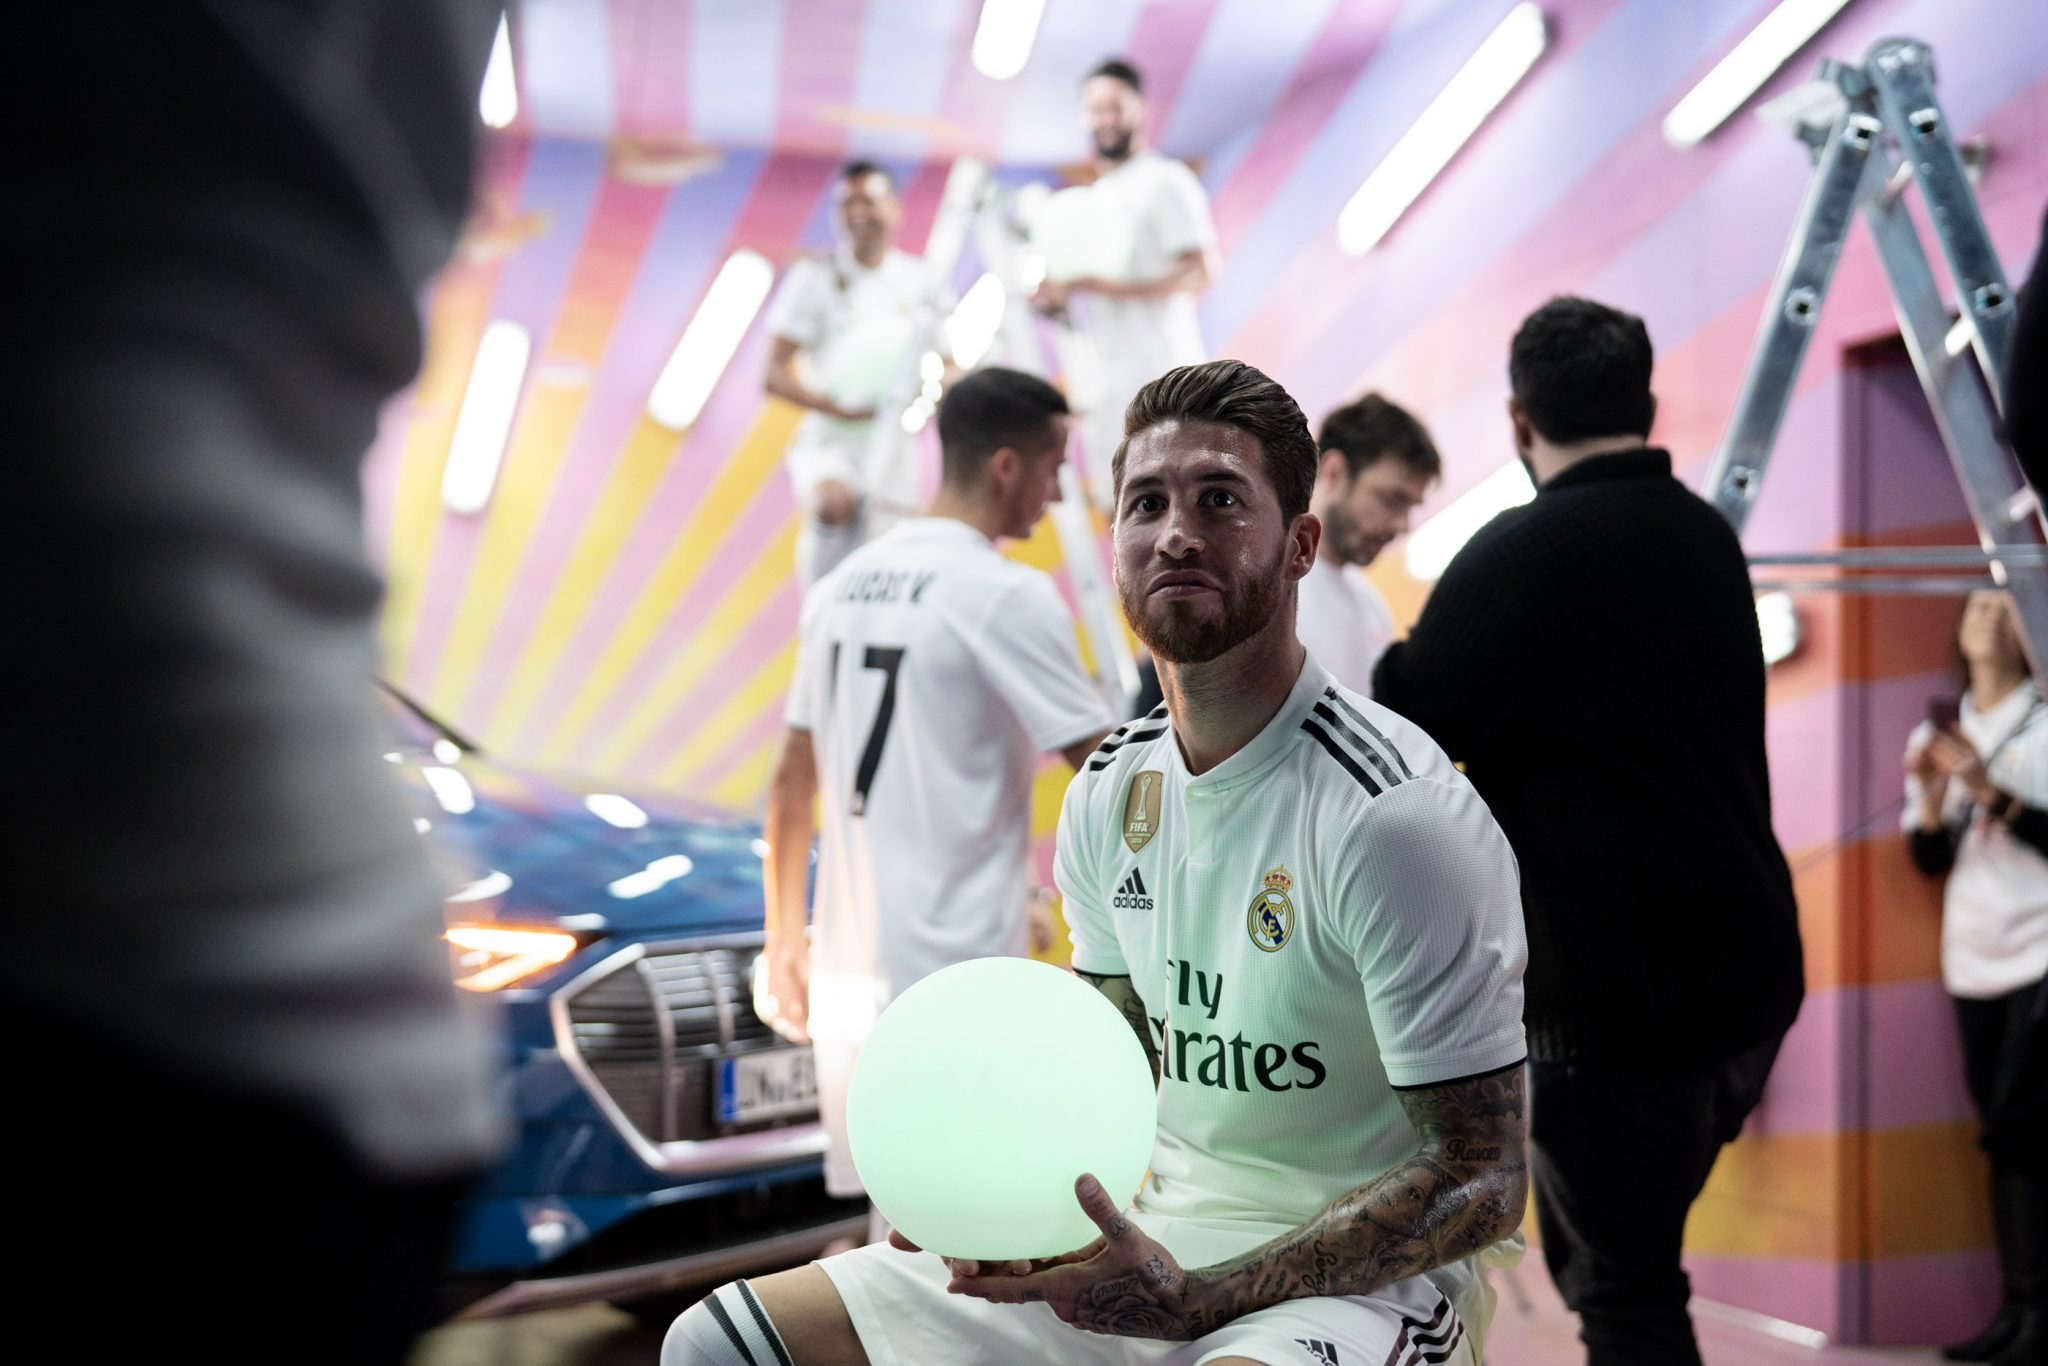 David LaChapelle | Audi x Real Madrid | Behind-the-scenes photographs from the Audi E-tron launch shoot in Madrid. | 16